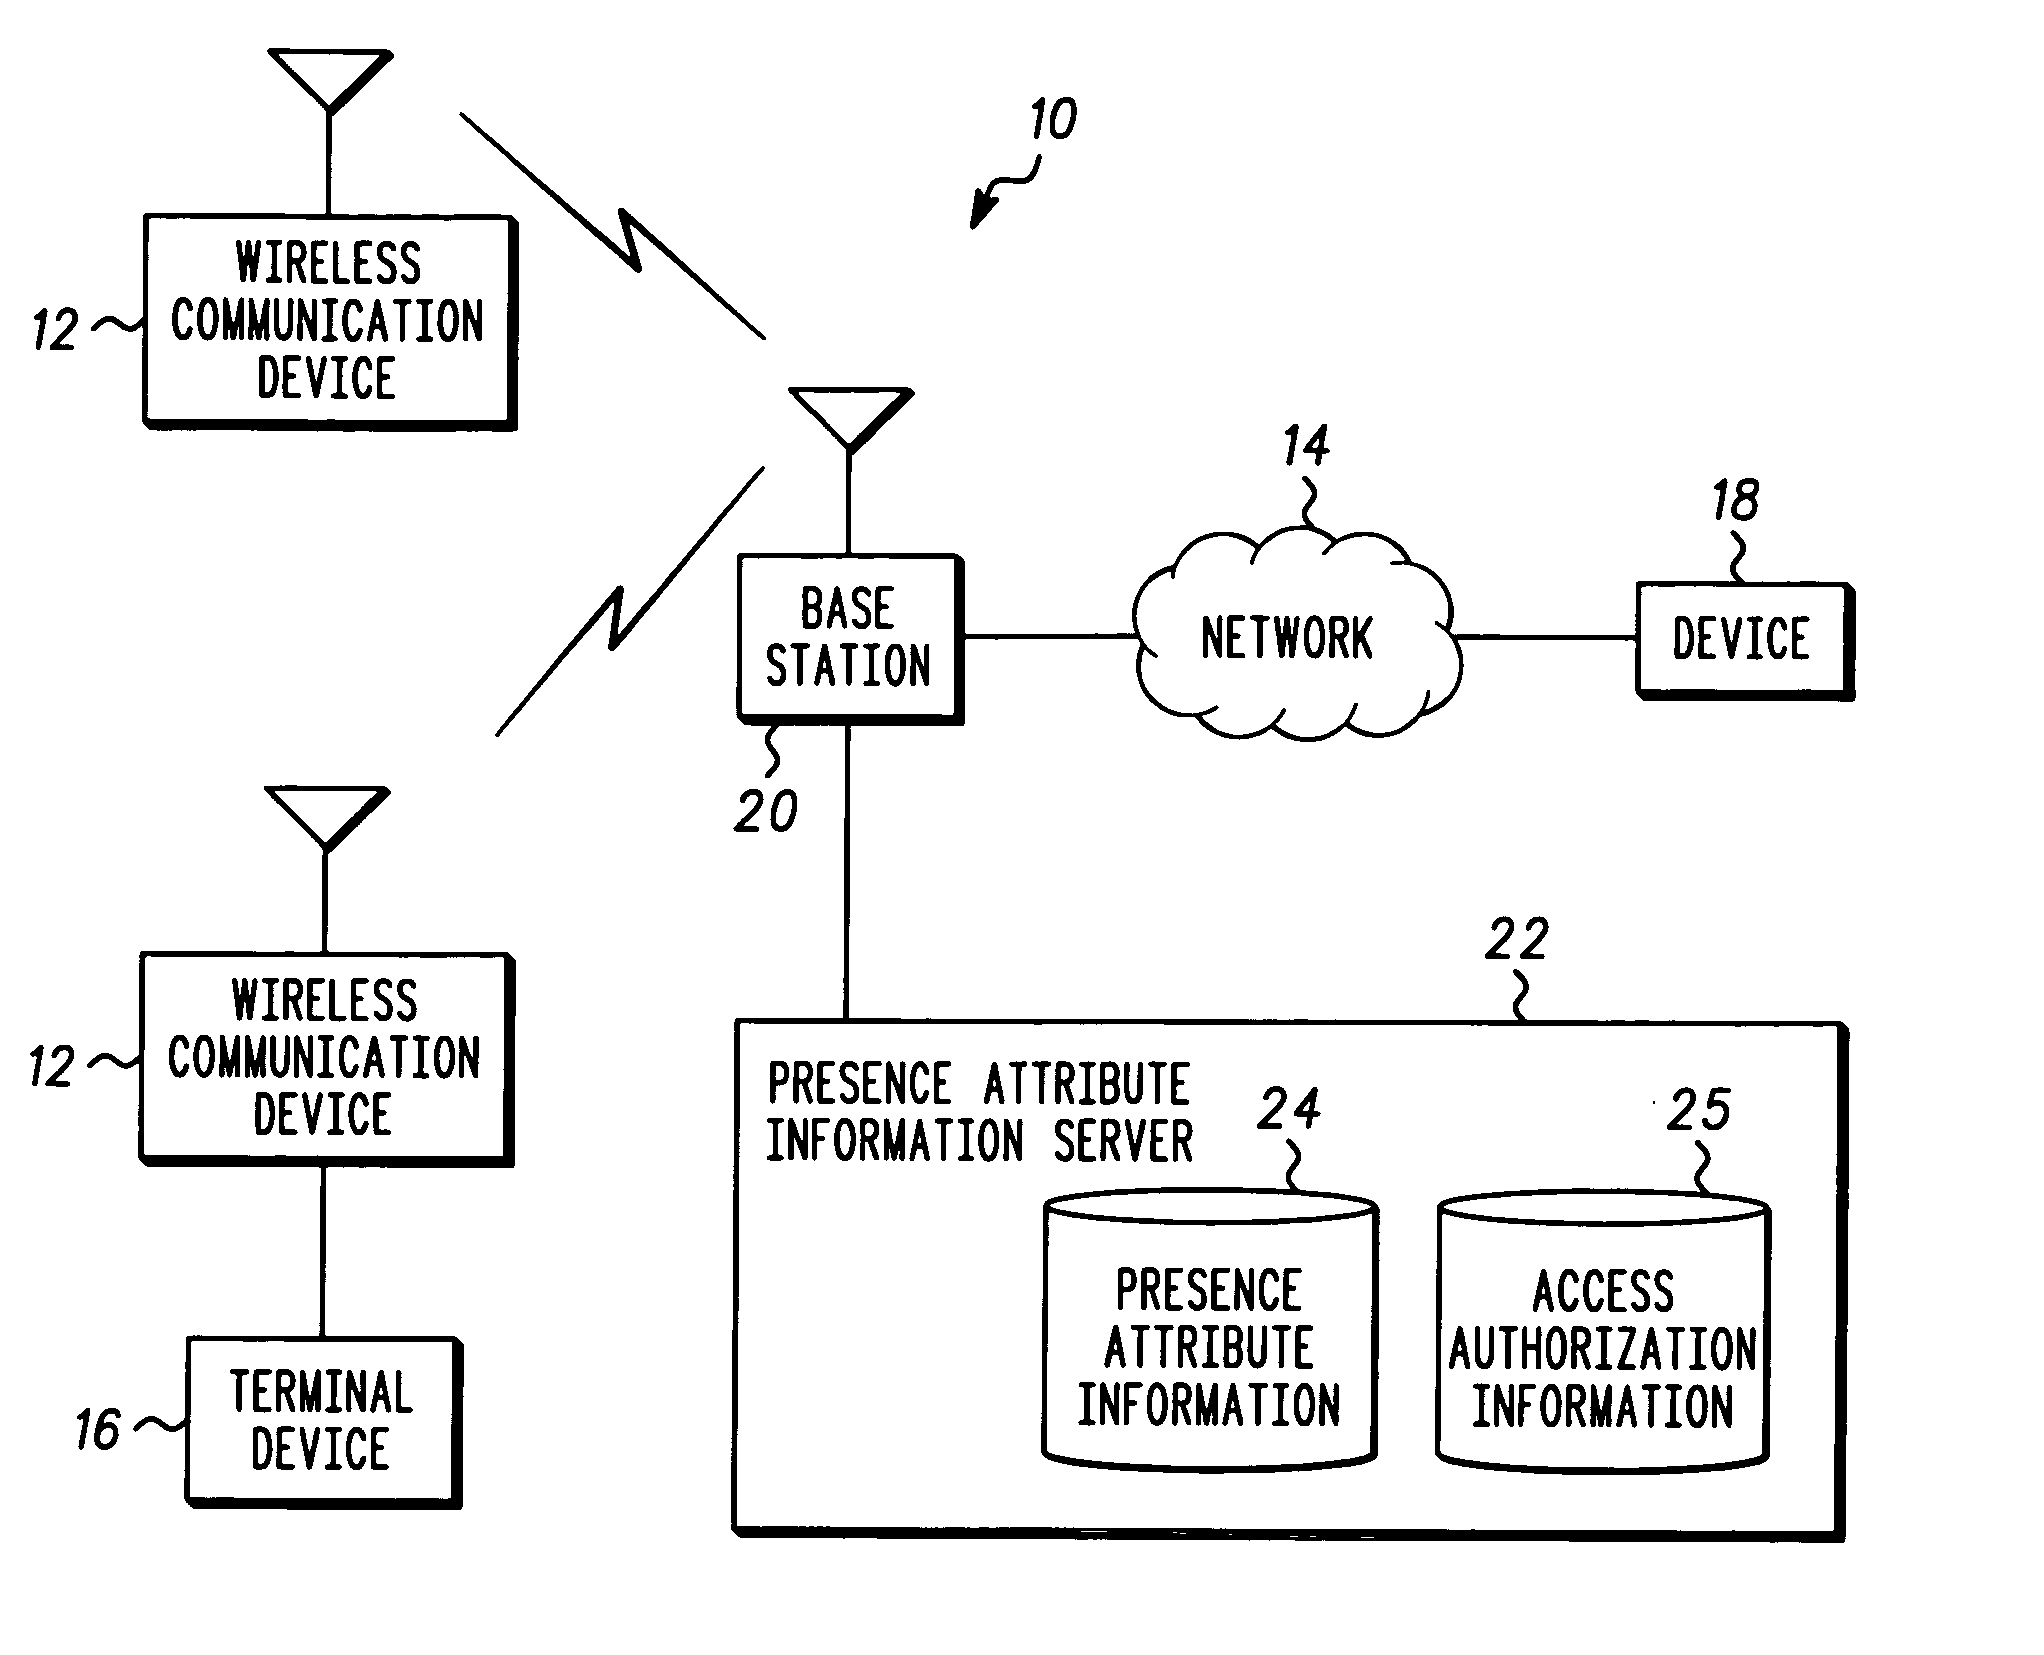 Method and system for managing access to presence attribute information